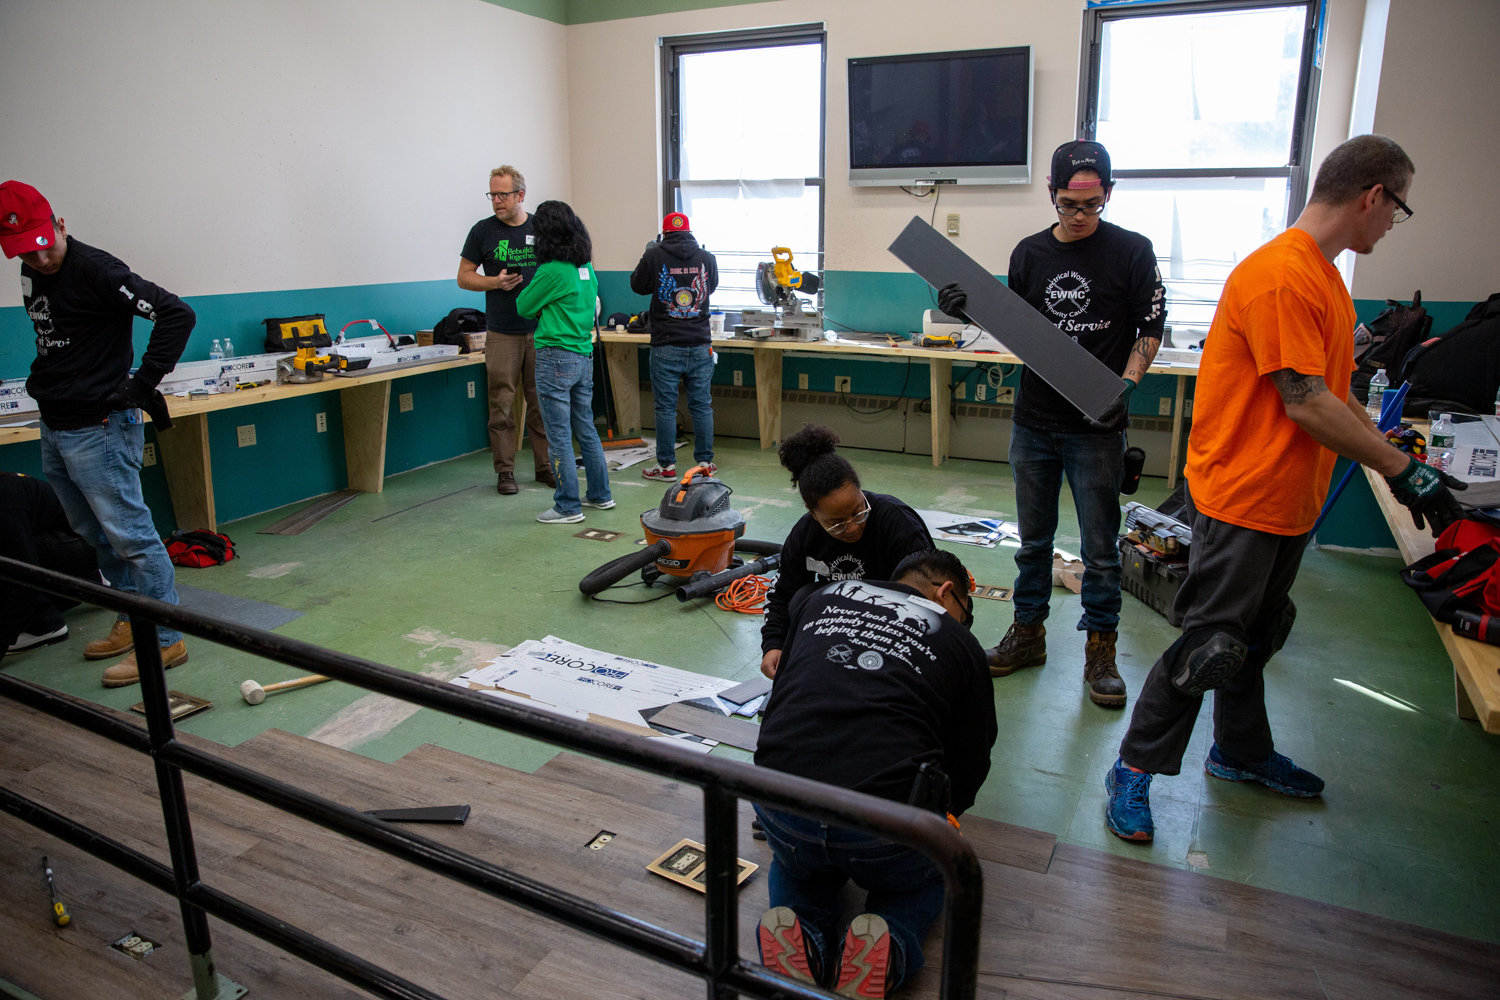 Volunteers from Rebuilding Together NYC and Local Union No. 3 IBEW resurface a classroom floor at the Kingsbridge Heights Community Center.